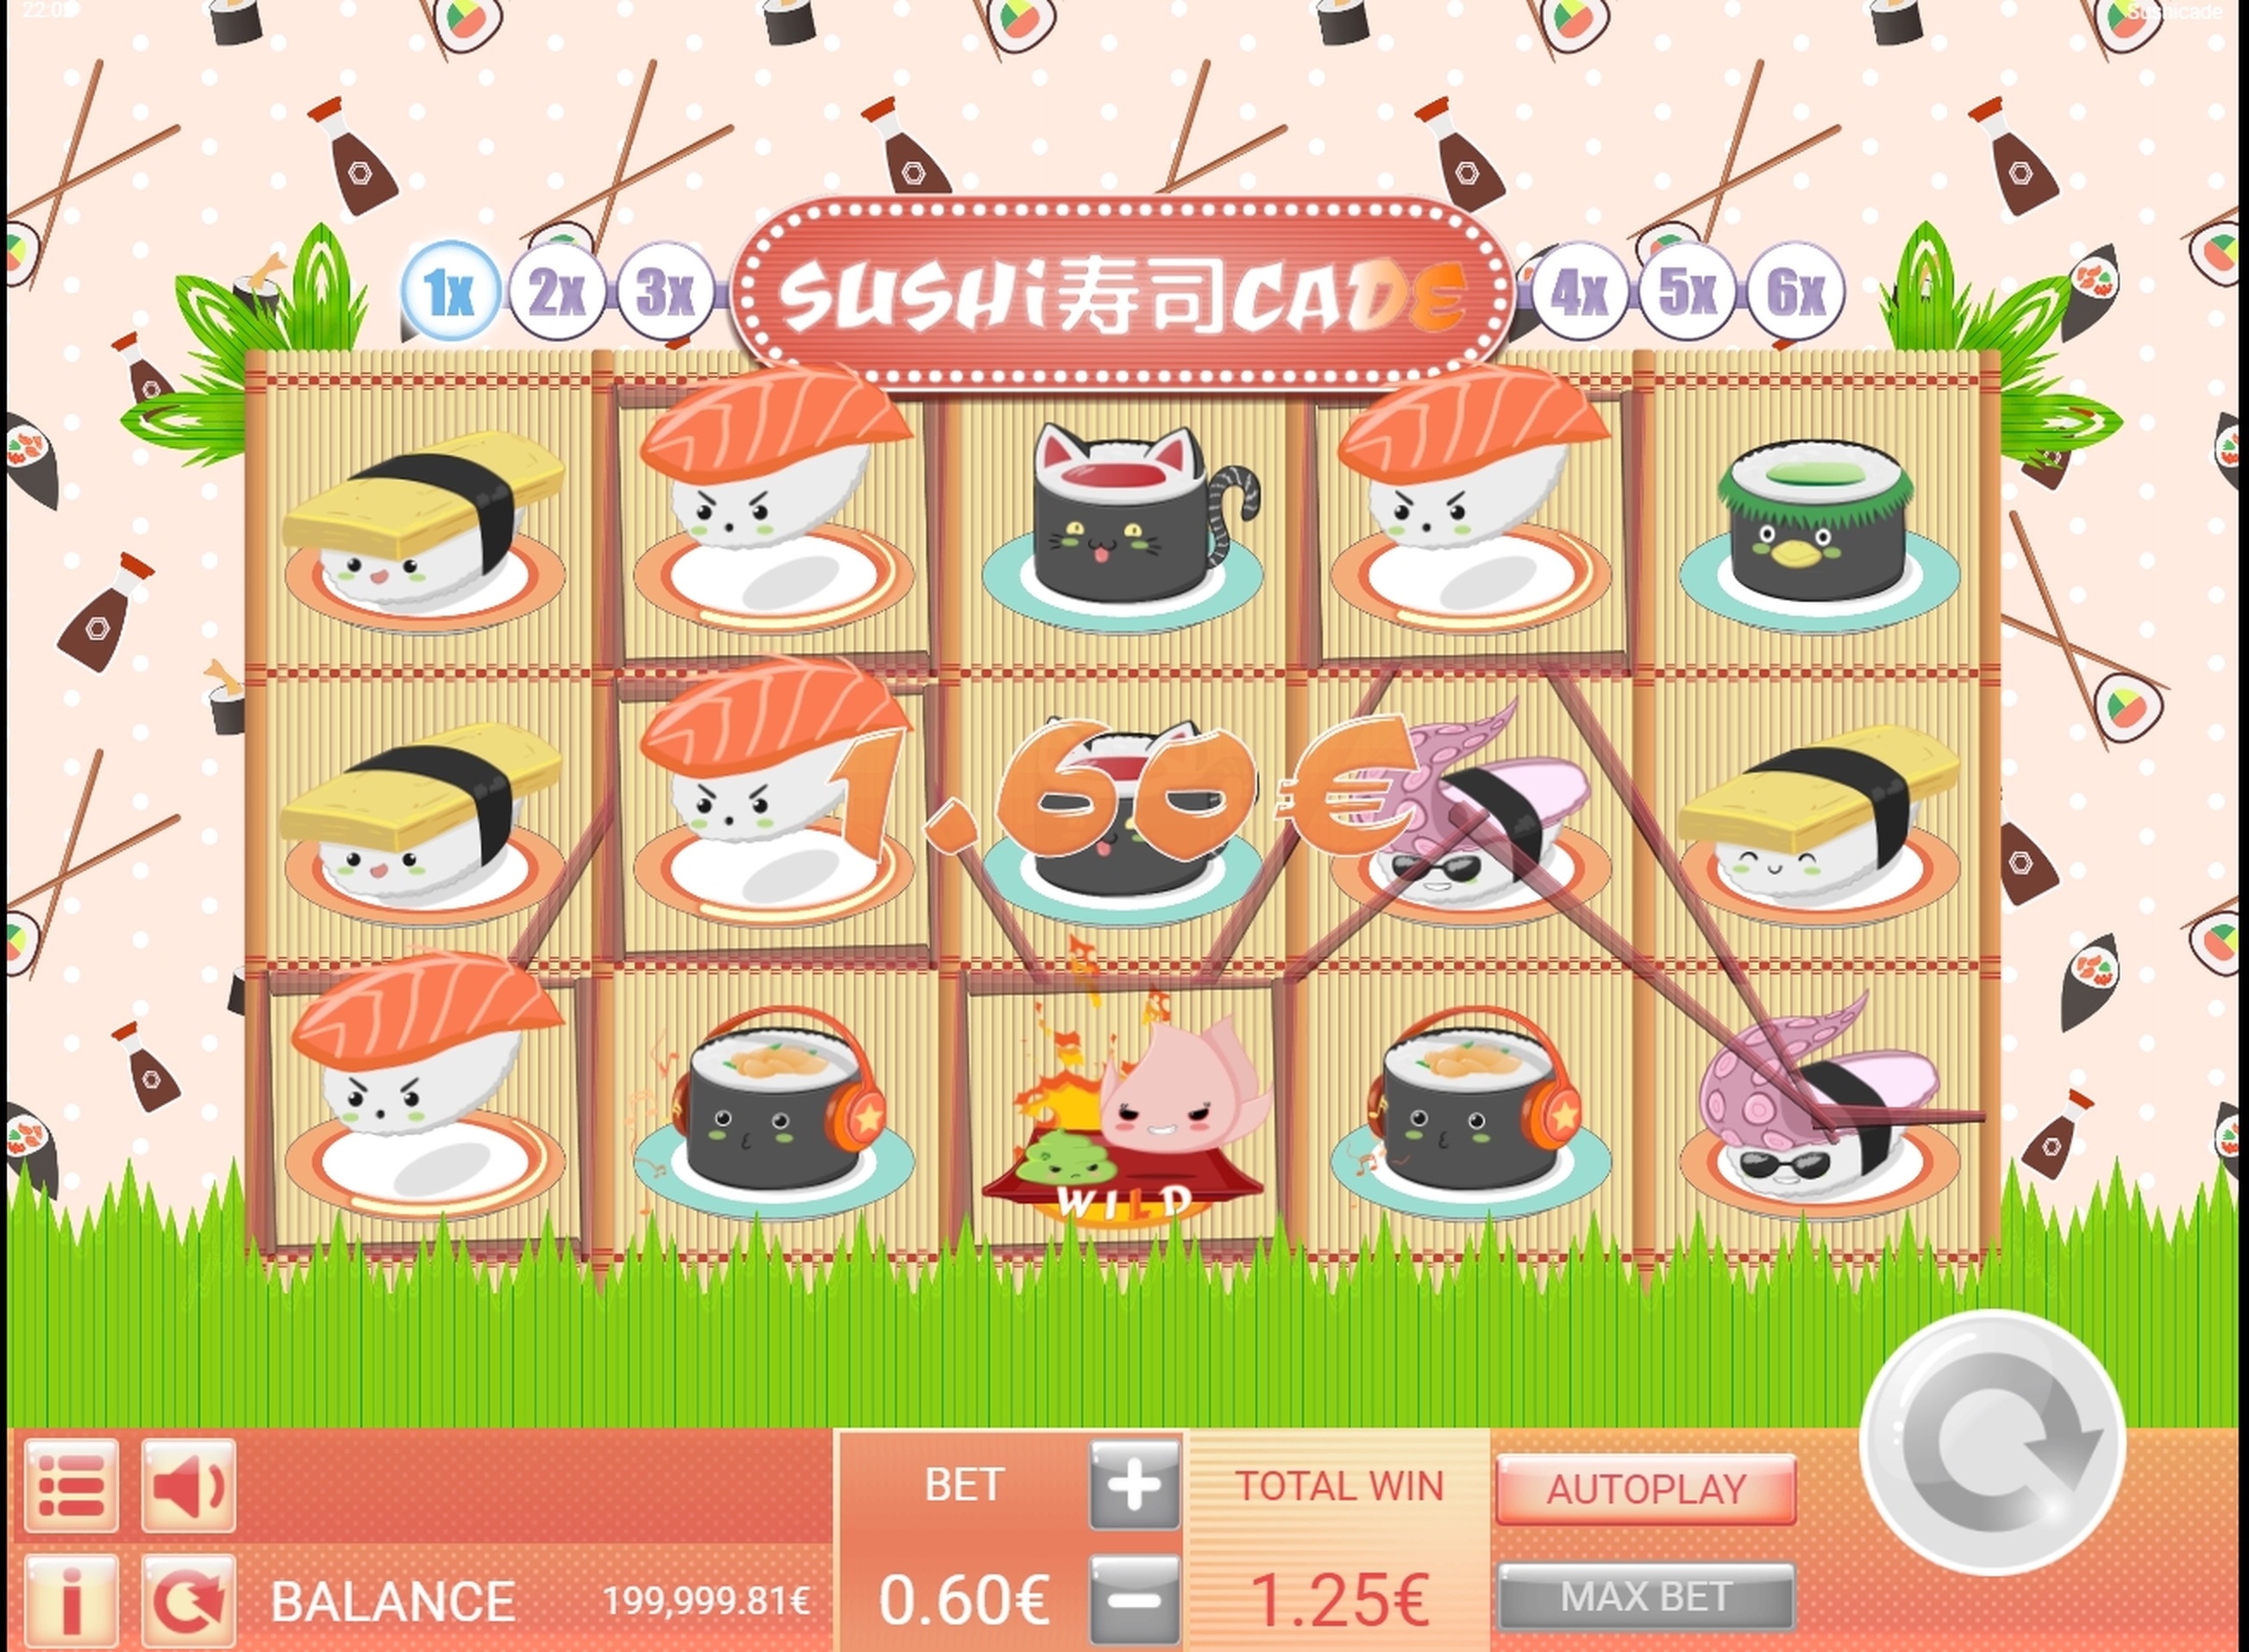 Win Money in Sushicade Free Slot Game by Gamatron